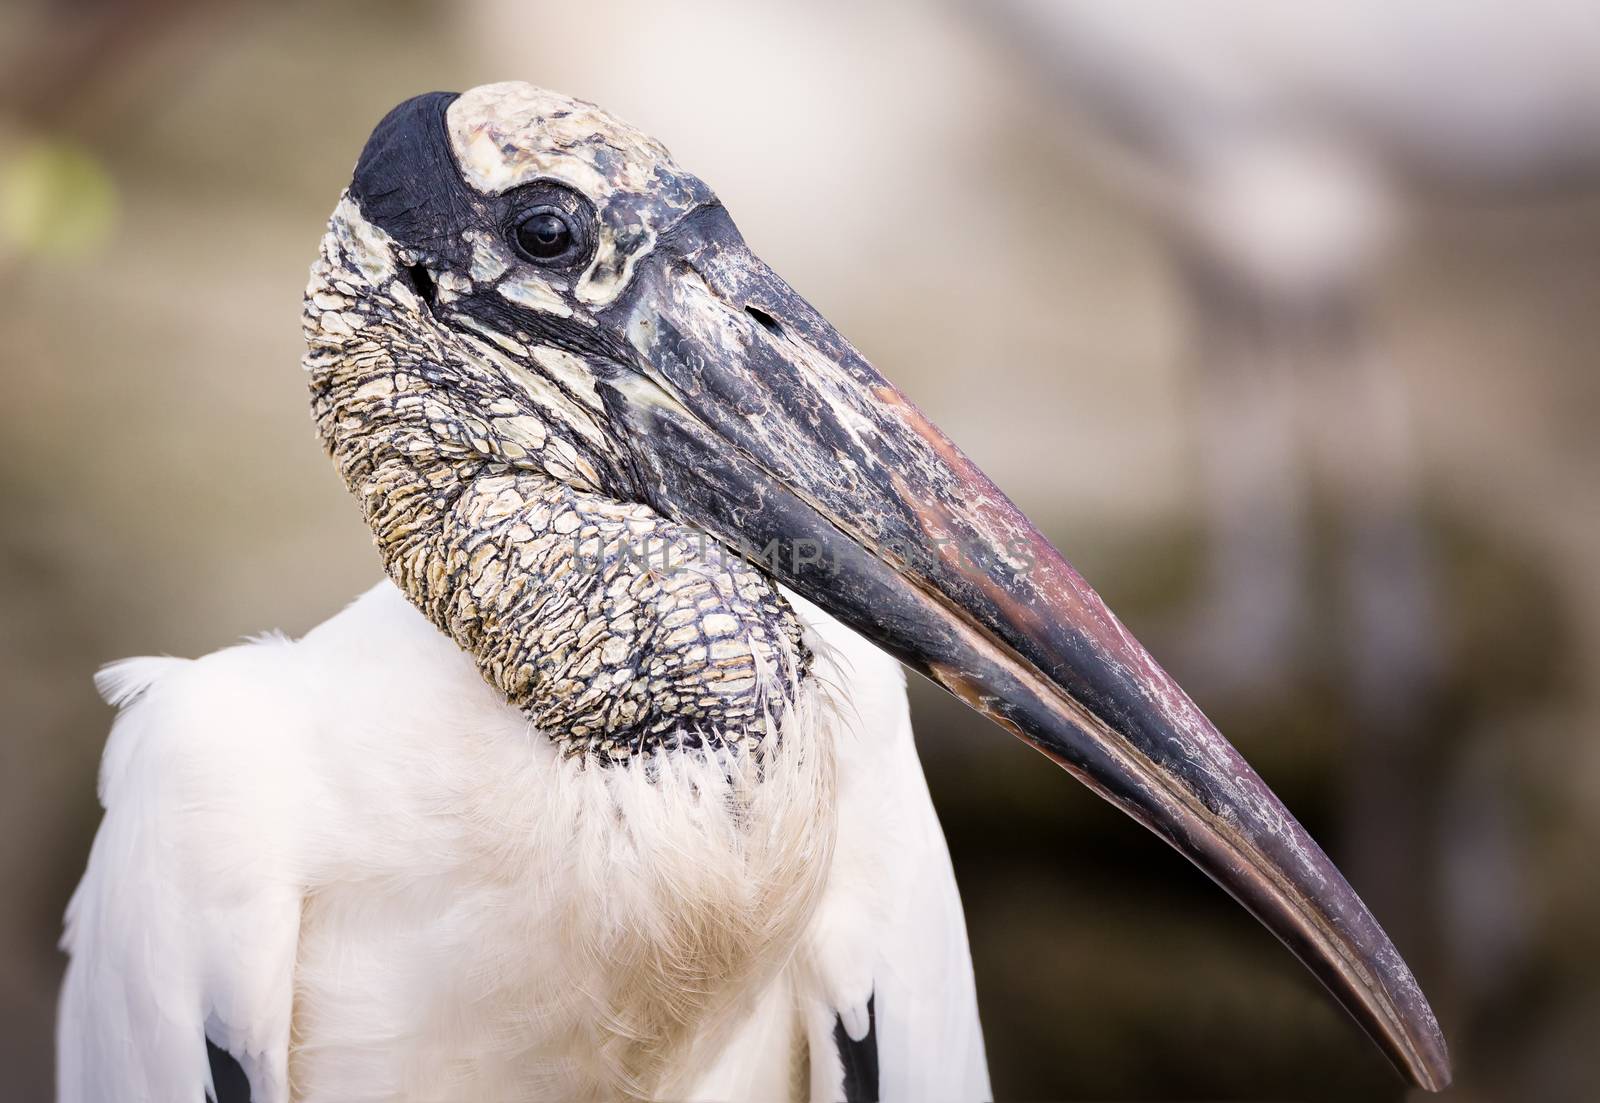 A portrait of a wild stork in Florida, USA. Color Image, Day